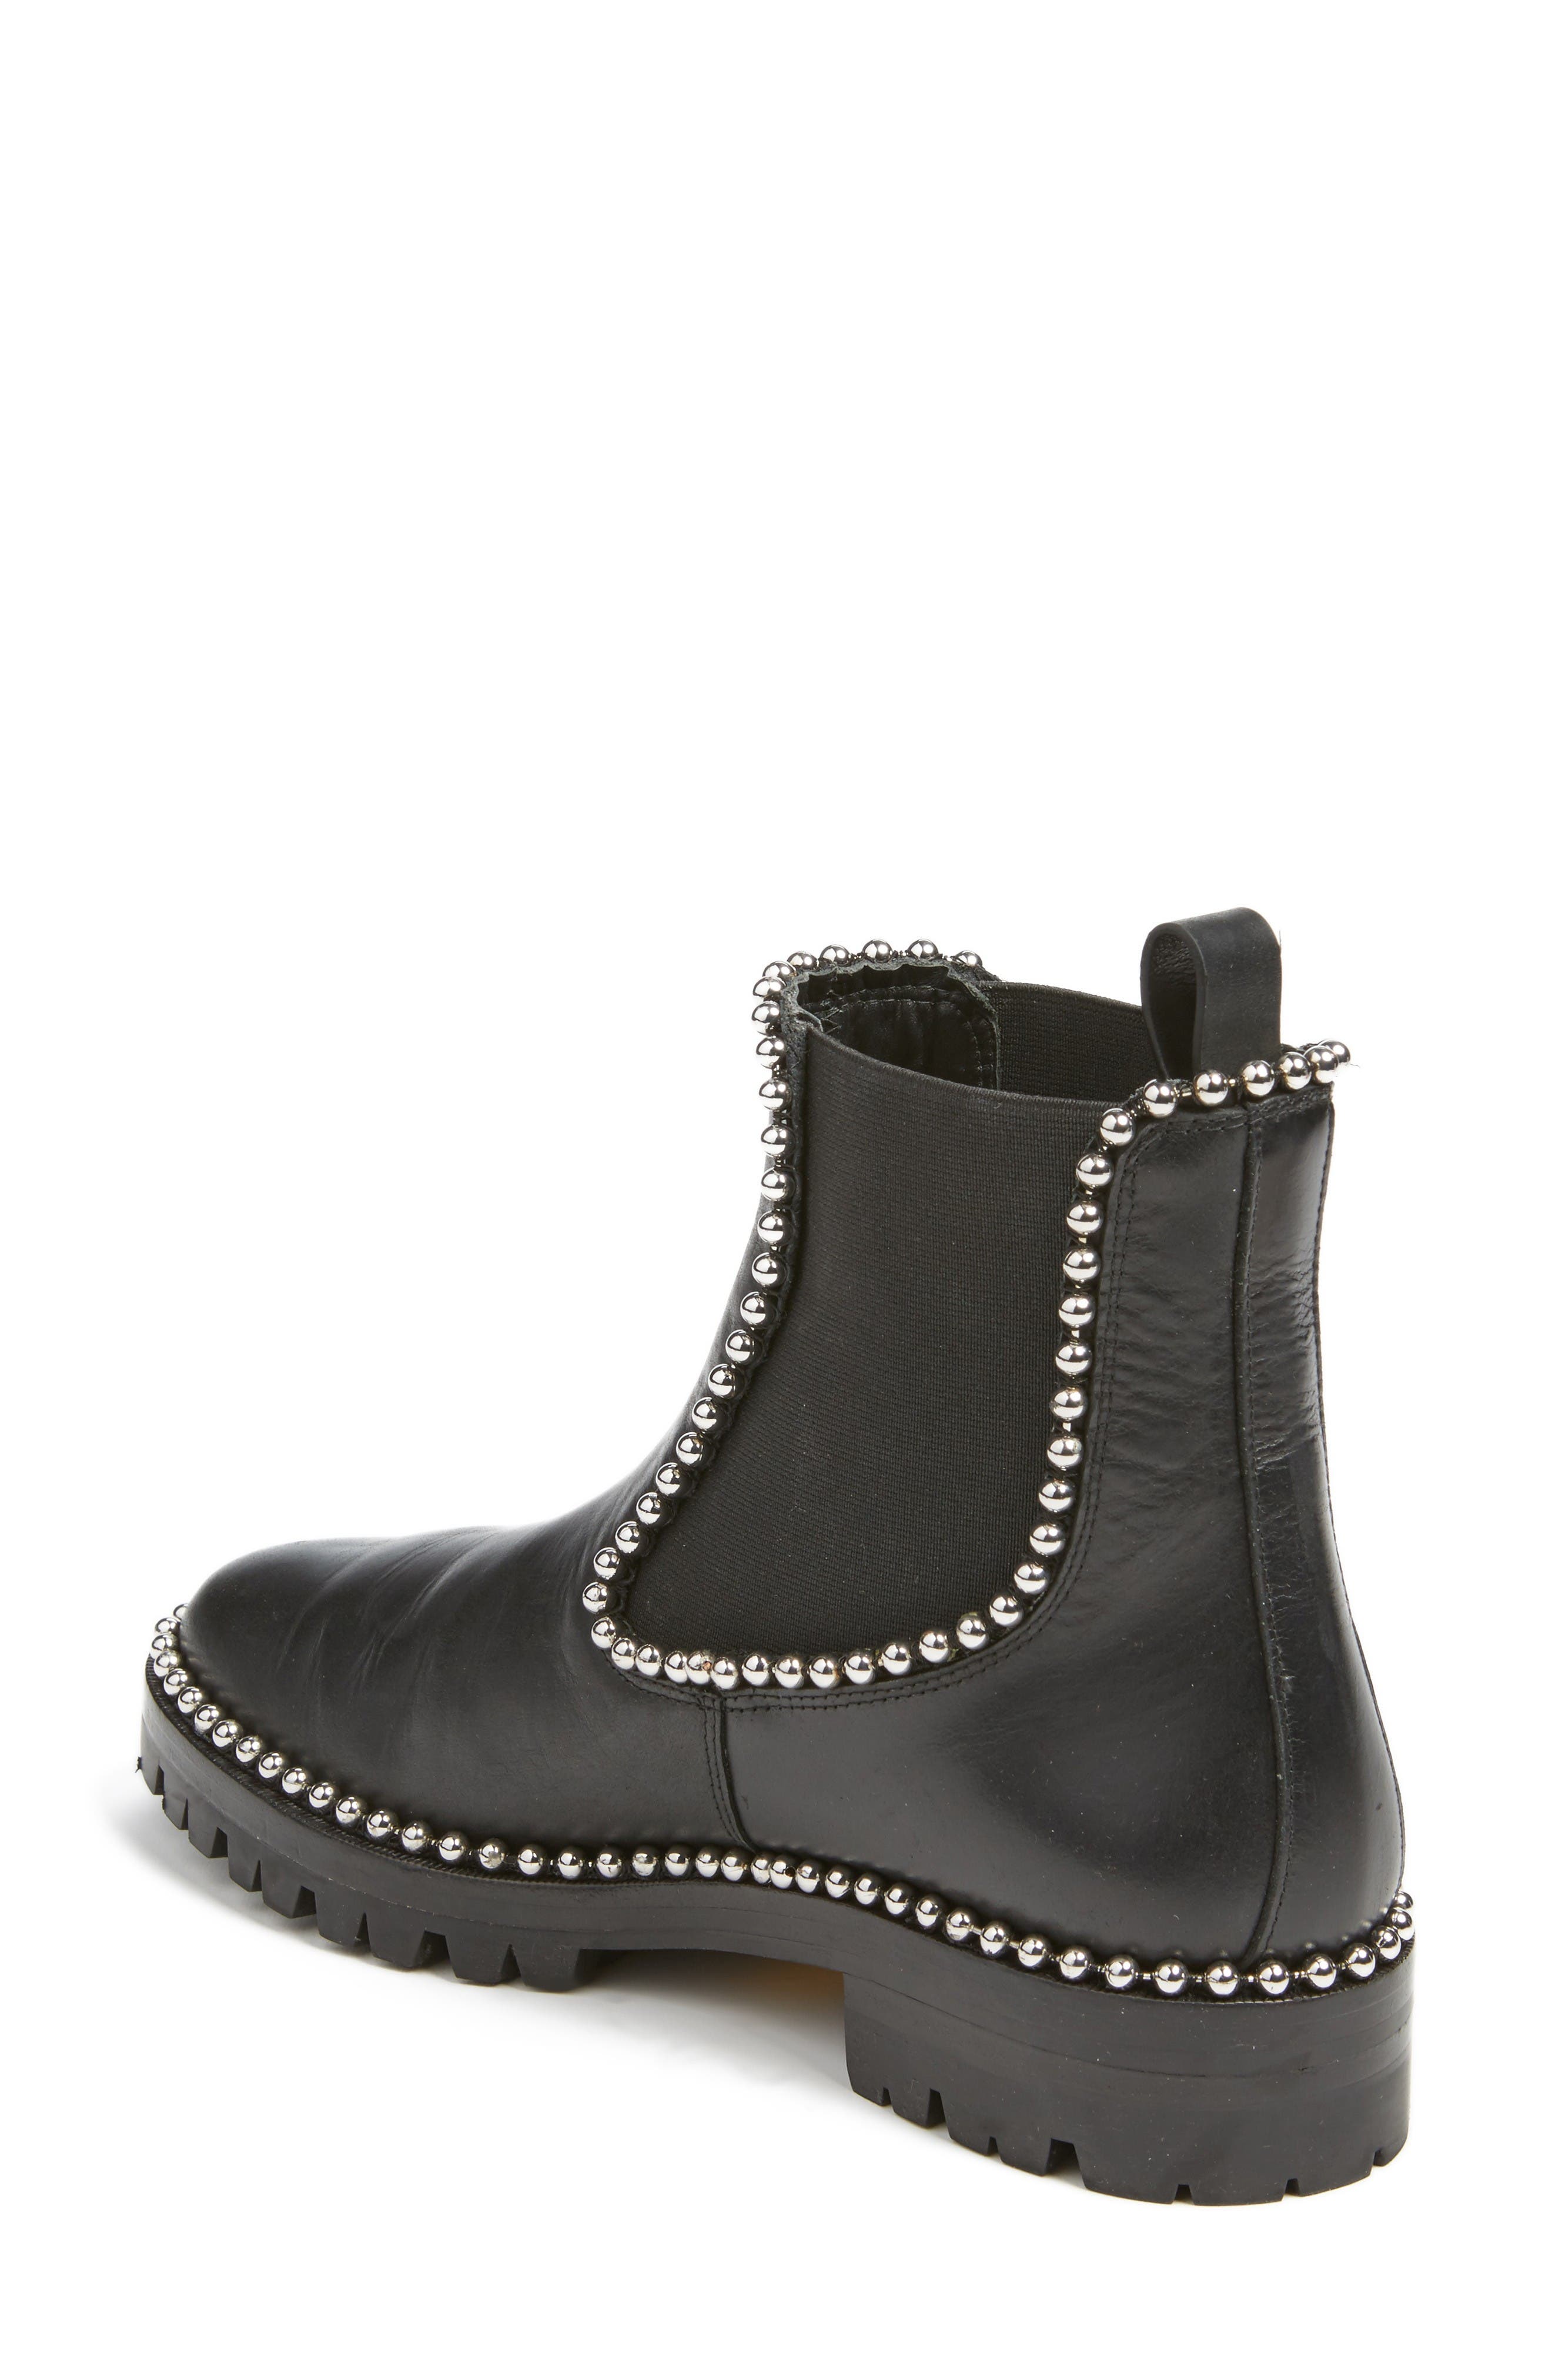 ALEXANDER WANG SPENCER BALL CHAIN-TRIMMED LEATHER CHELSEA BOOTS, BLACK ...